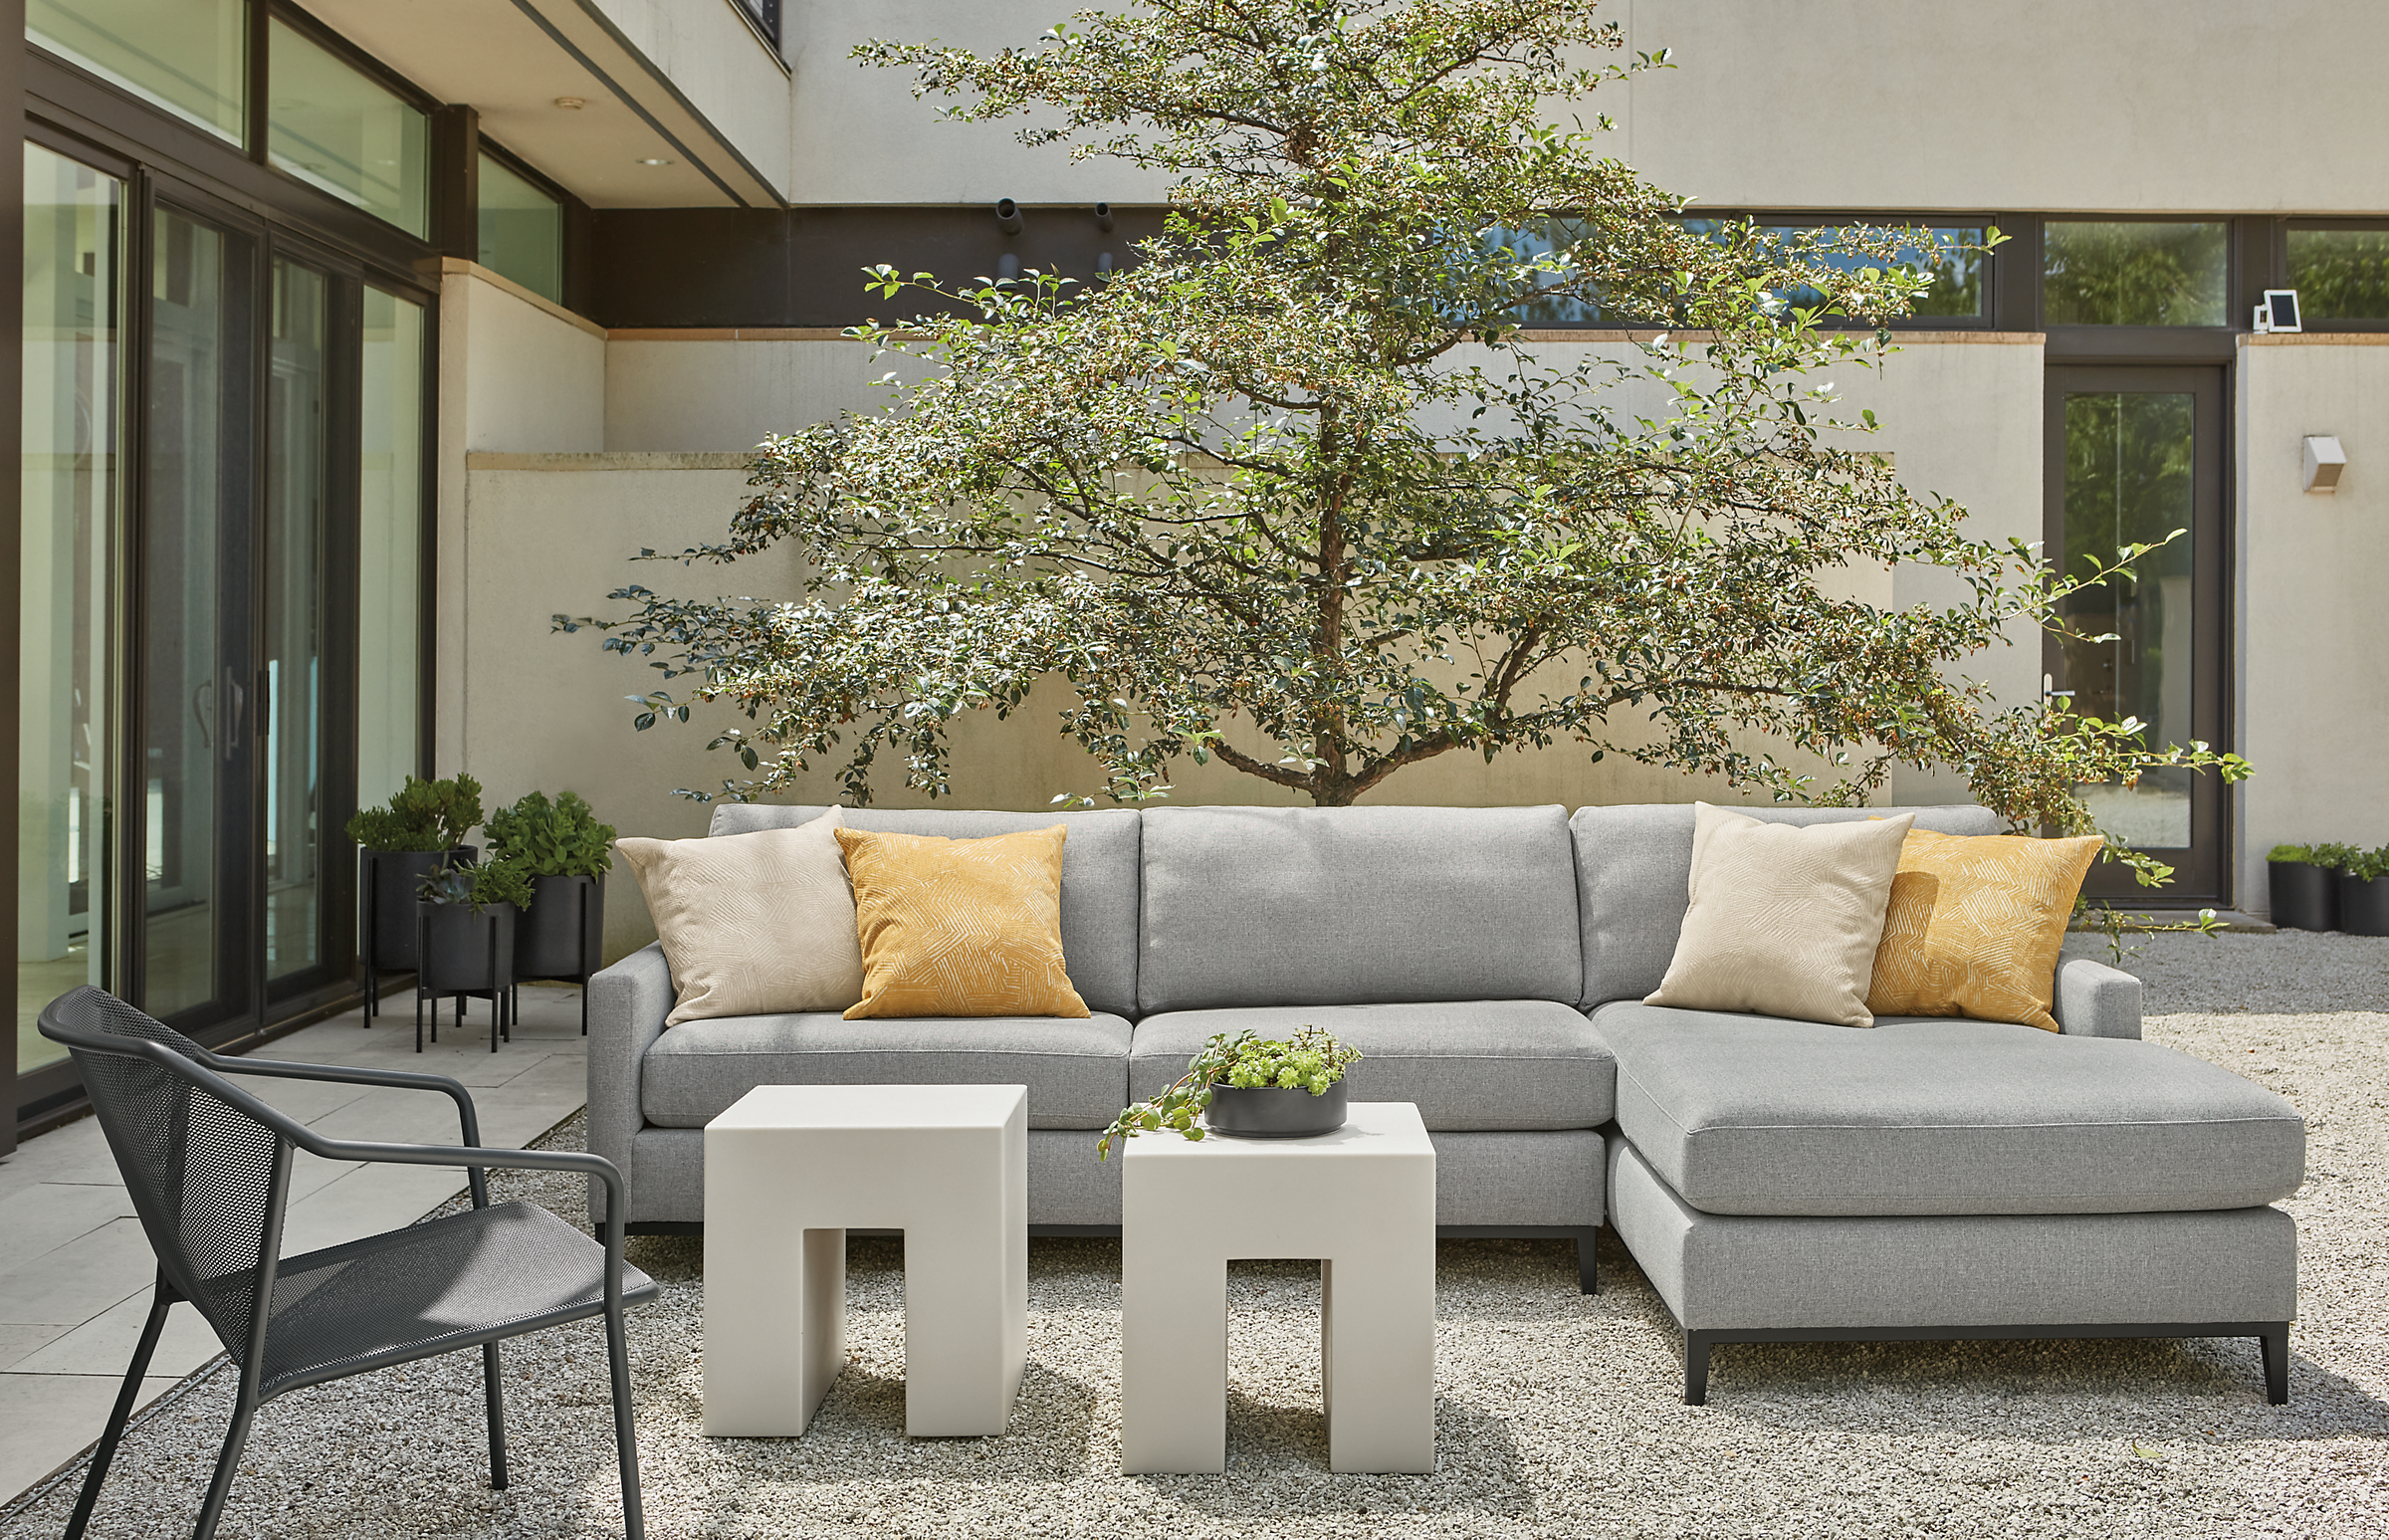 Tomas outdoor sofa with chaise in Mist steel fabric, two Vignelli cubes in light grey and Theo lounge chair in graphite.